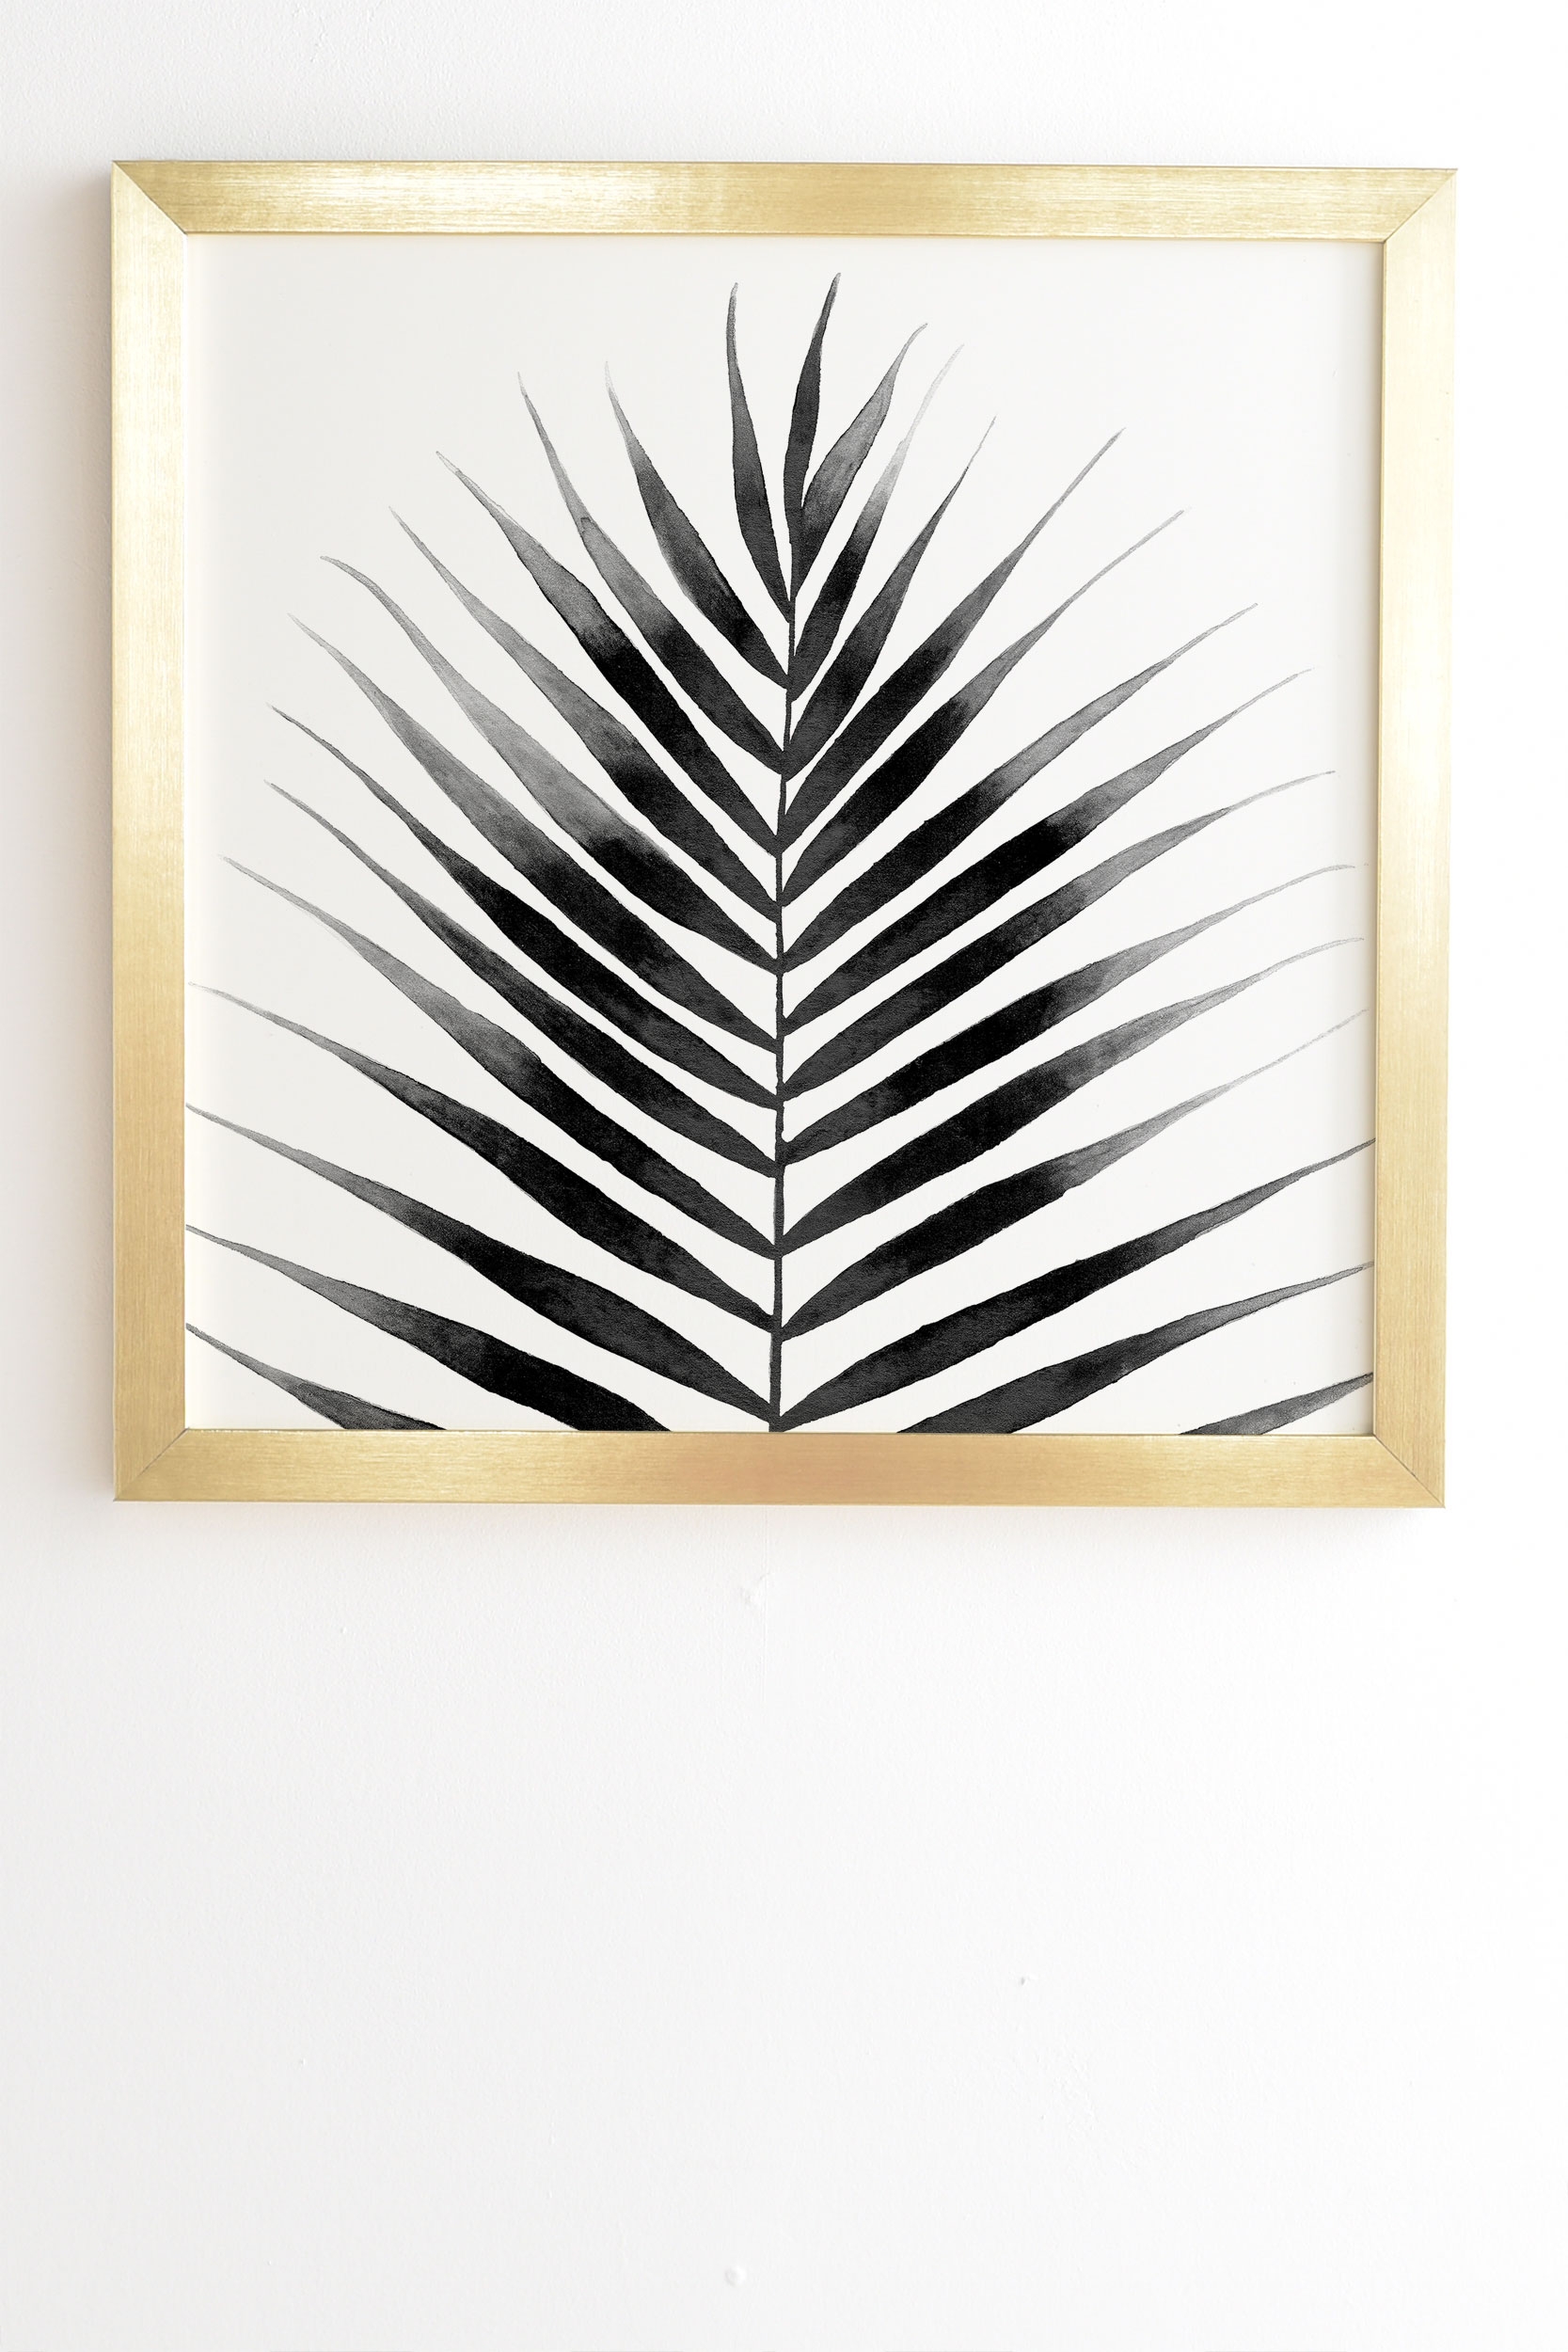 Palm Leaf Watercolor Black And White by Kris Kivu - Framed Wall Art Basic Gold 19" x 22.4" - Image 1